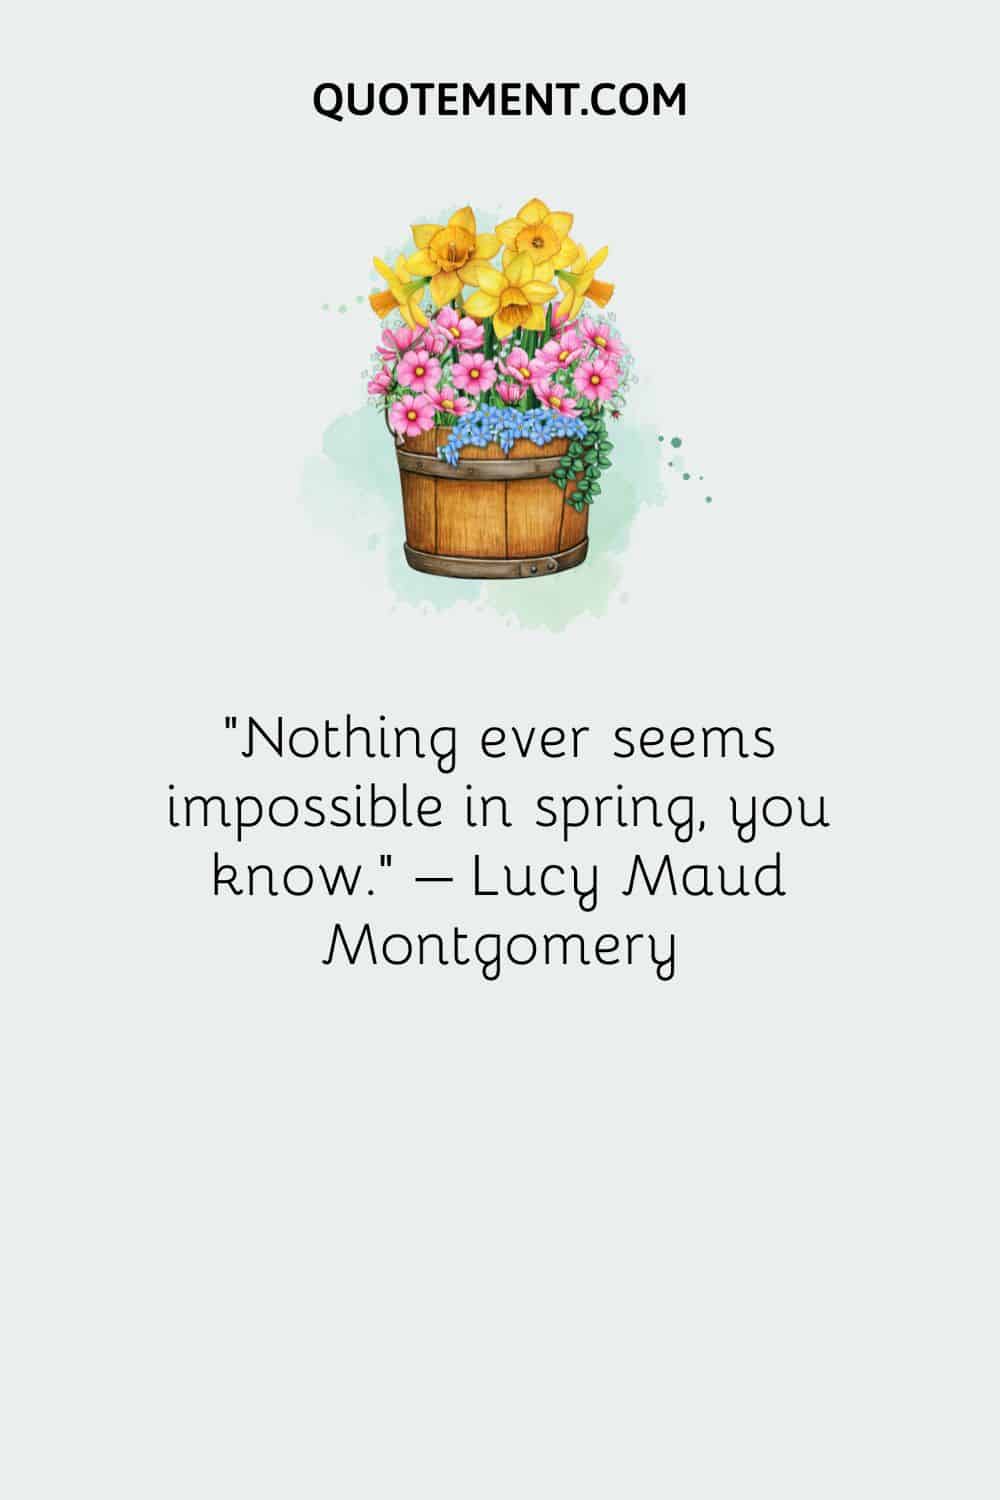 Nothing ever seems impossible in spring, you know. – Lucy Maud Montgomery